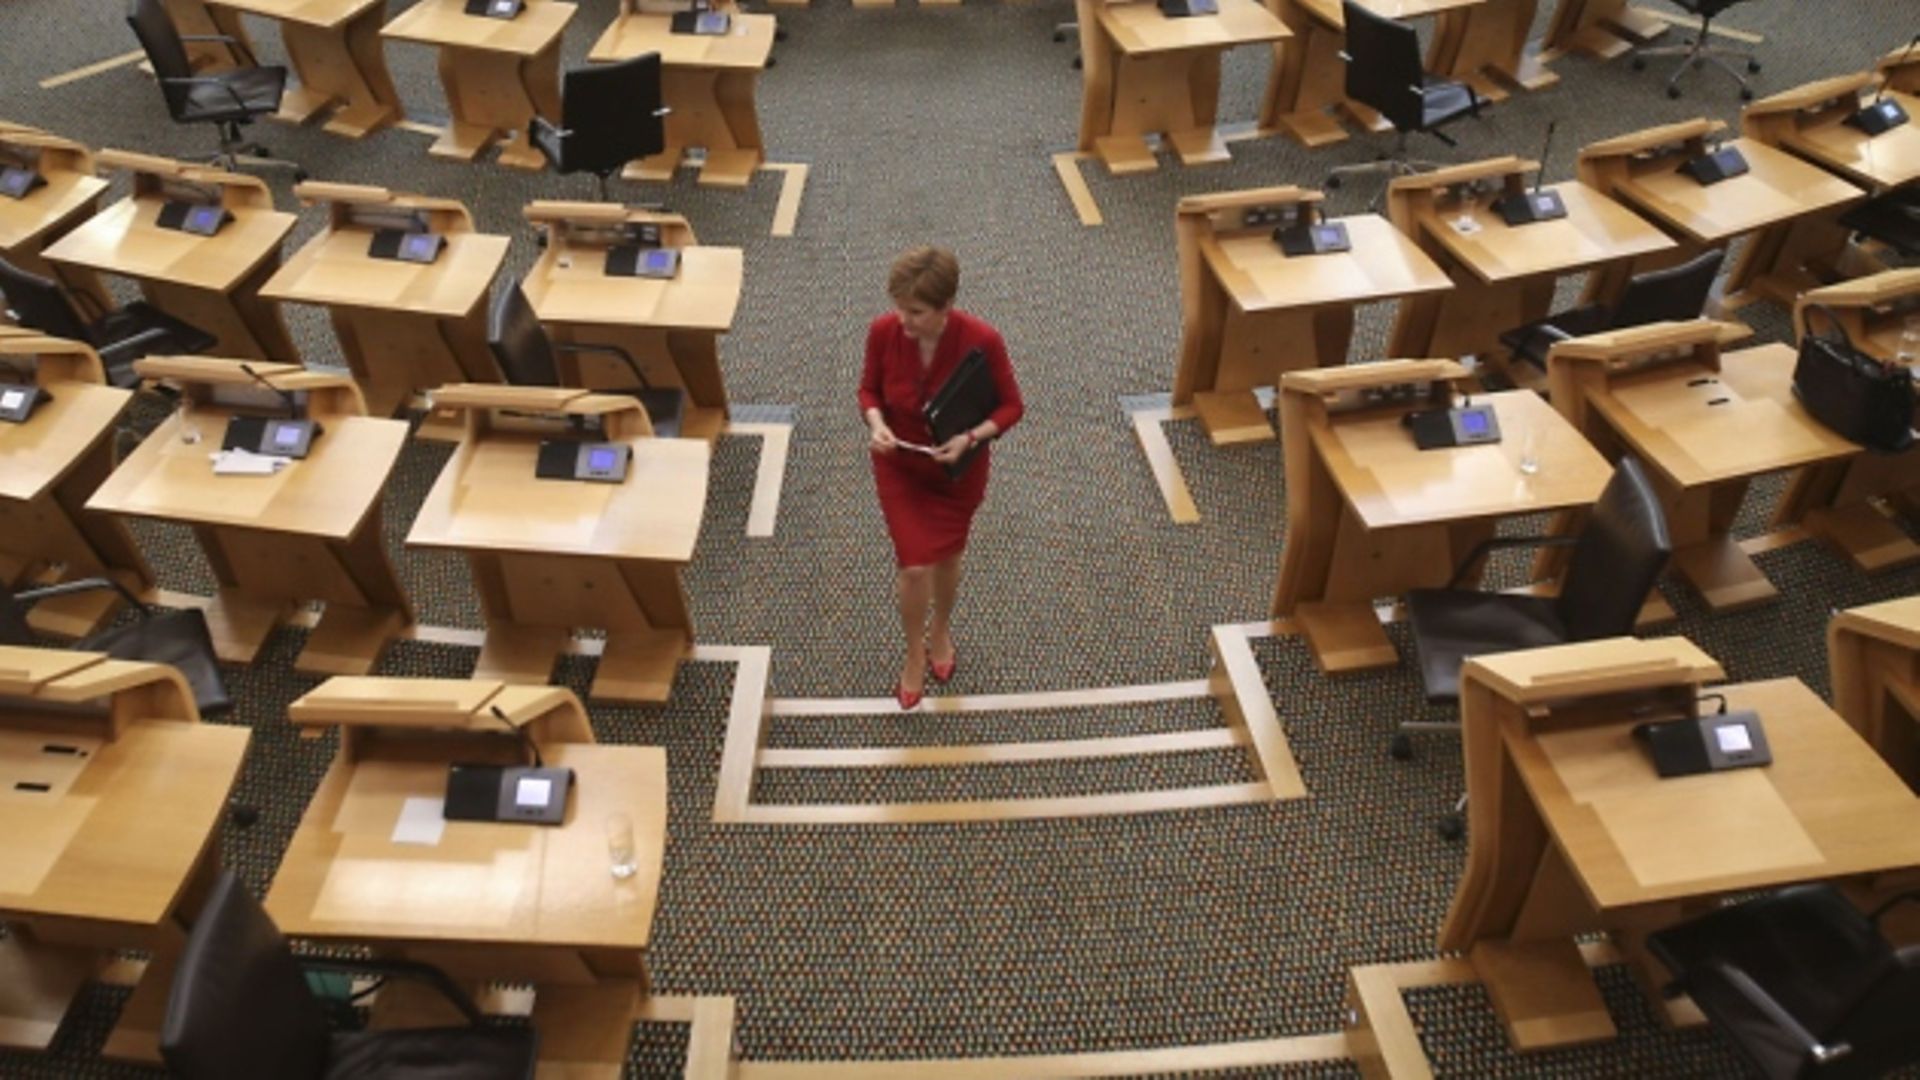 First Minister Nicola Sturgeon attends First Minister's Questions at the Scottish Parliament Holyrood on August 26, 2020 in Edinburgh, Scotland. (Photo by Fraser Bremner - Pool/Getty Images) - Credit: Fraser Bremner - Pool/Getty Images